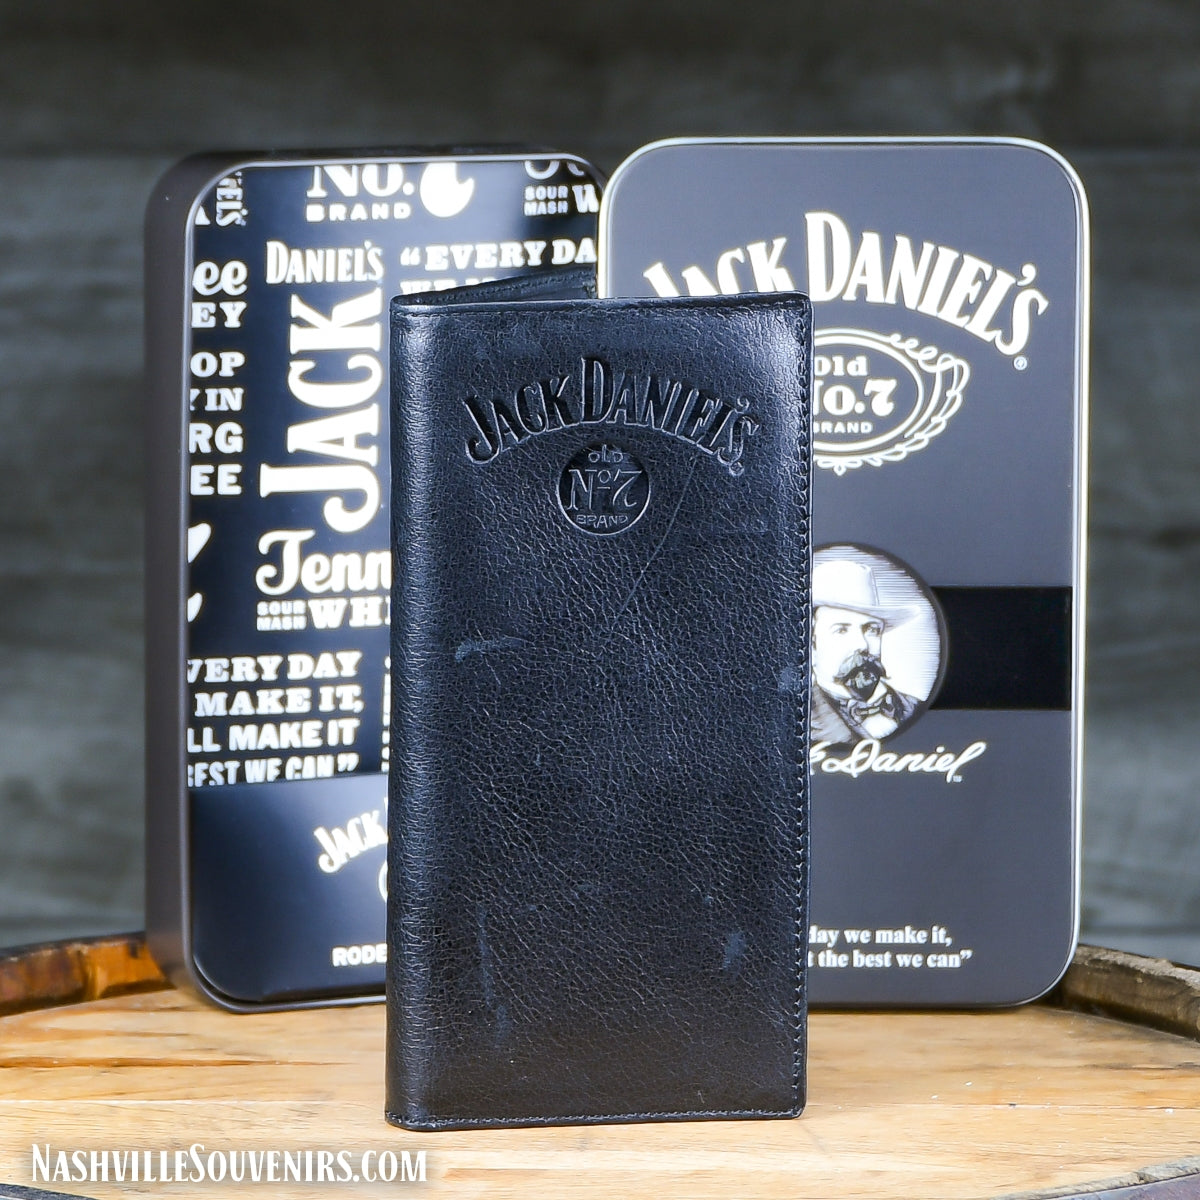 Officially licensed Jack Daniels Black Rodeo Wallet Embossed Logo. Get one today with FREE SHIPPING on all US orders over $75!